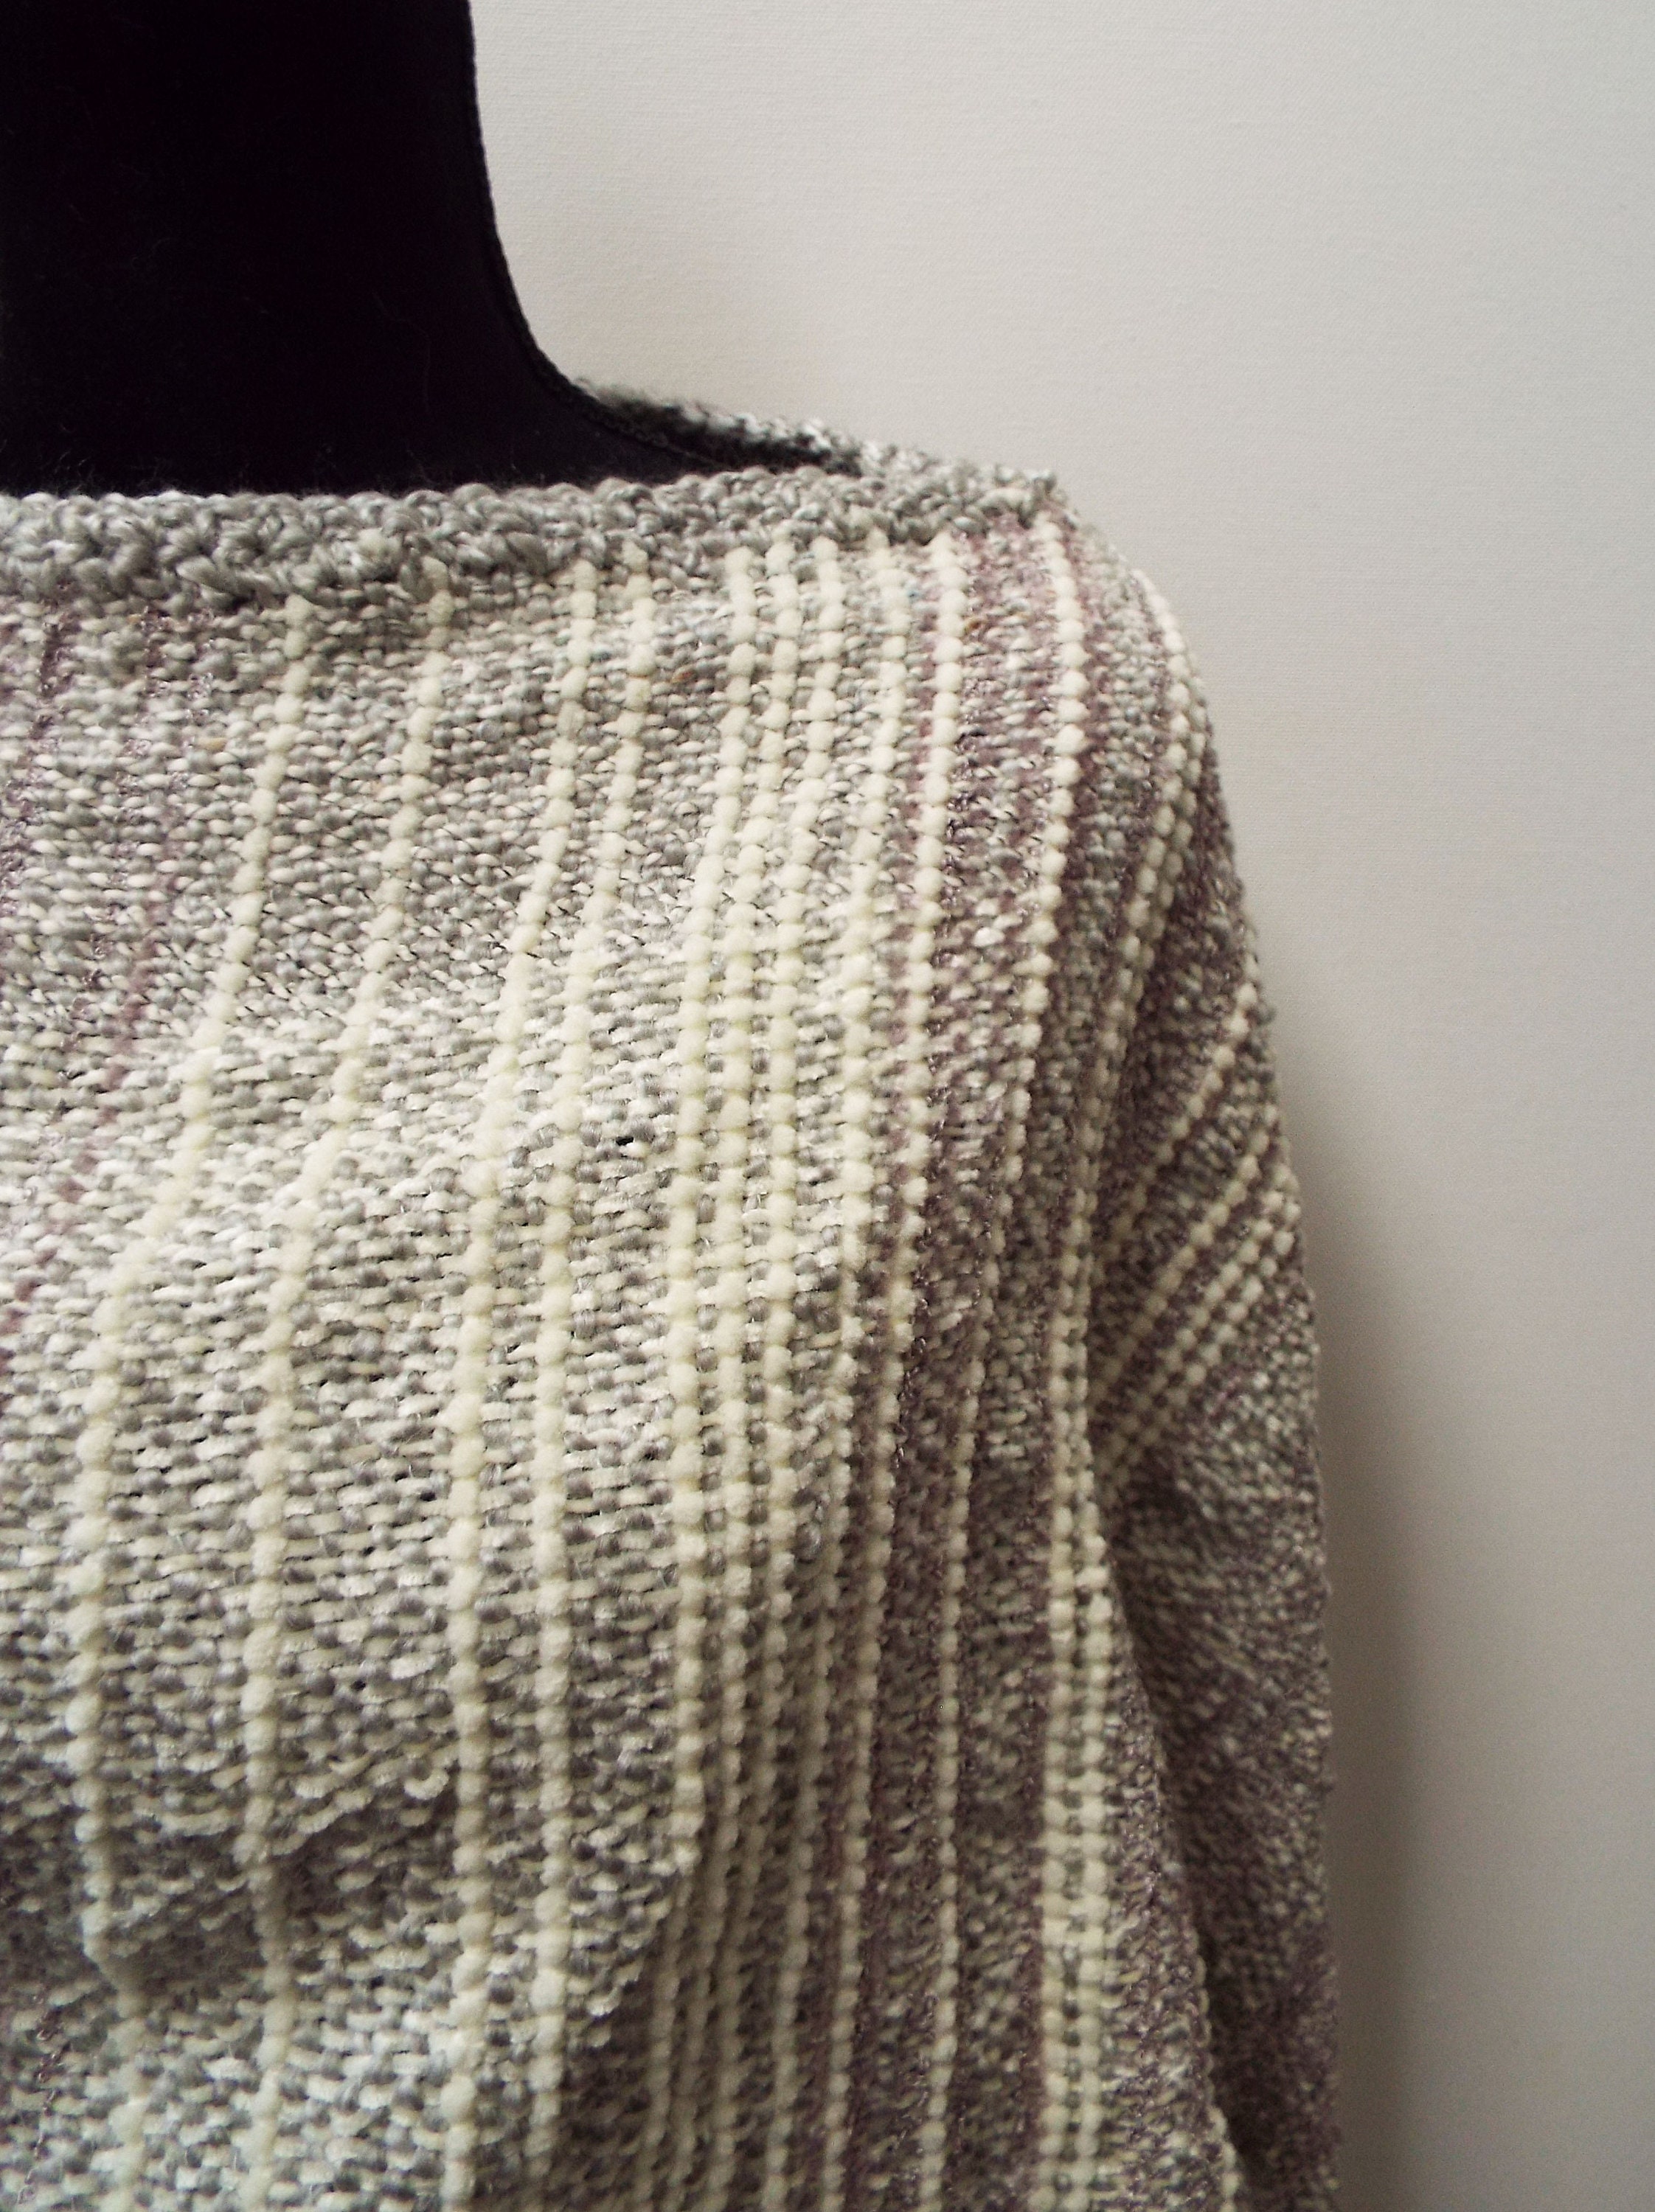 White and Grey Poncho With Stripes Handwoven Shawl Warm - Etsy